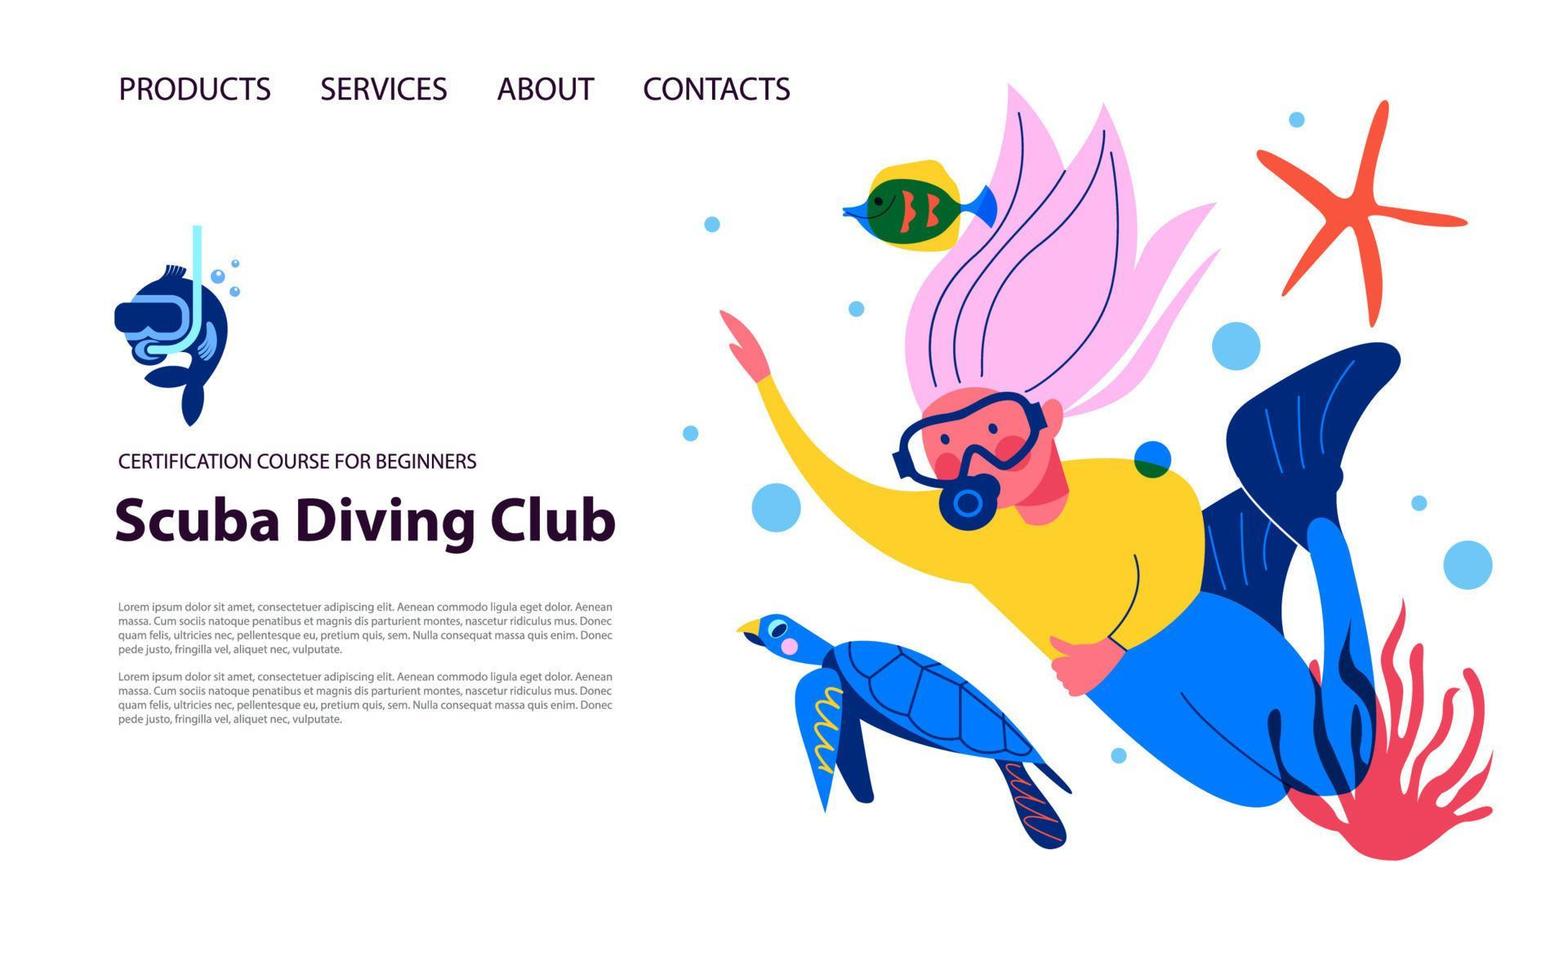 Diving. Extreme sport. Underwater swimming. Girl diver and exotic fish and underwater world. Vector illustration.